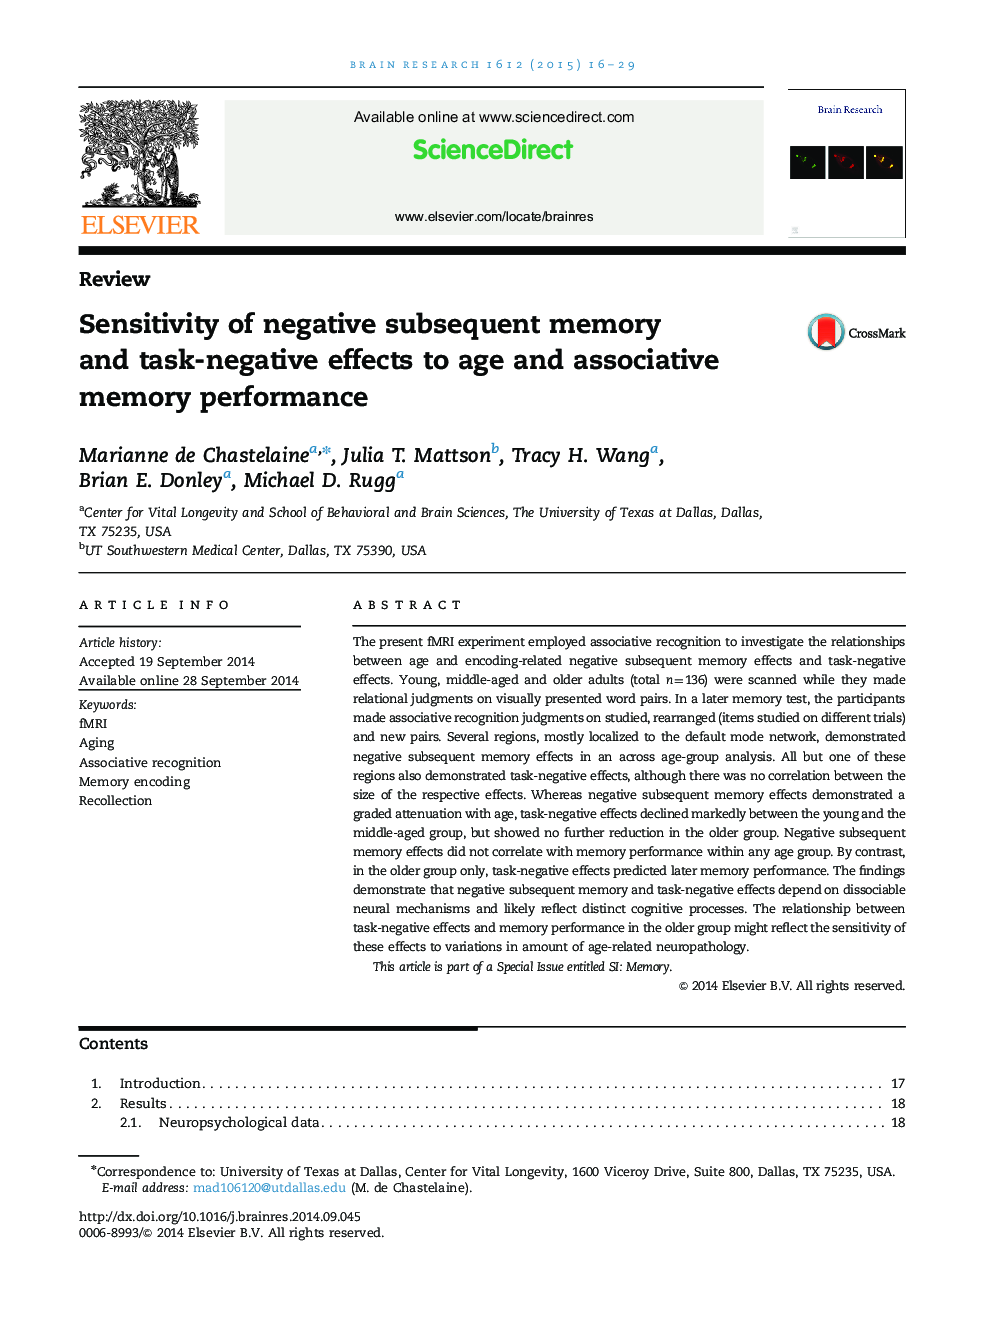 ReviewSensitivity of negative subsequent memory and task-negative effects to age and associative memory performance